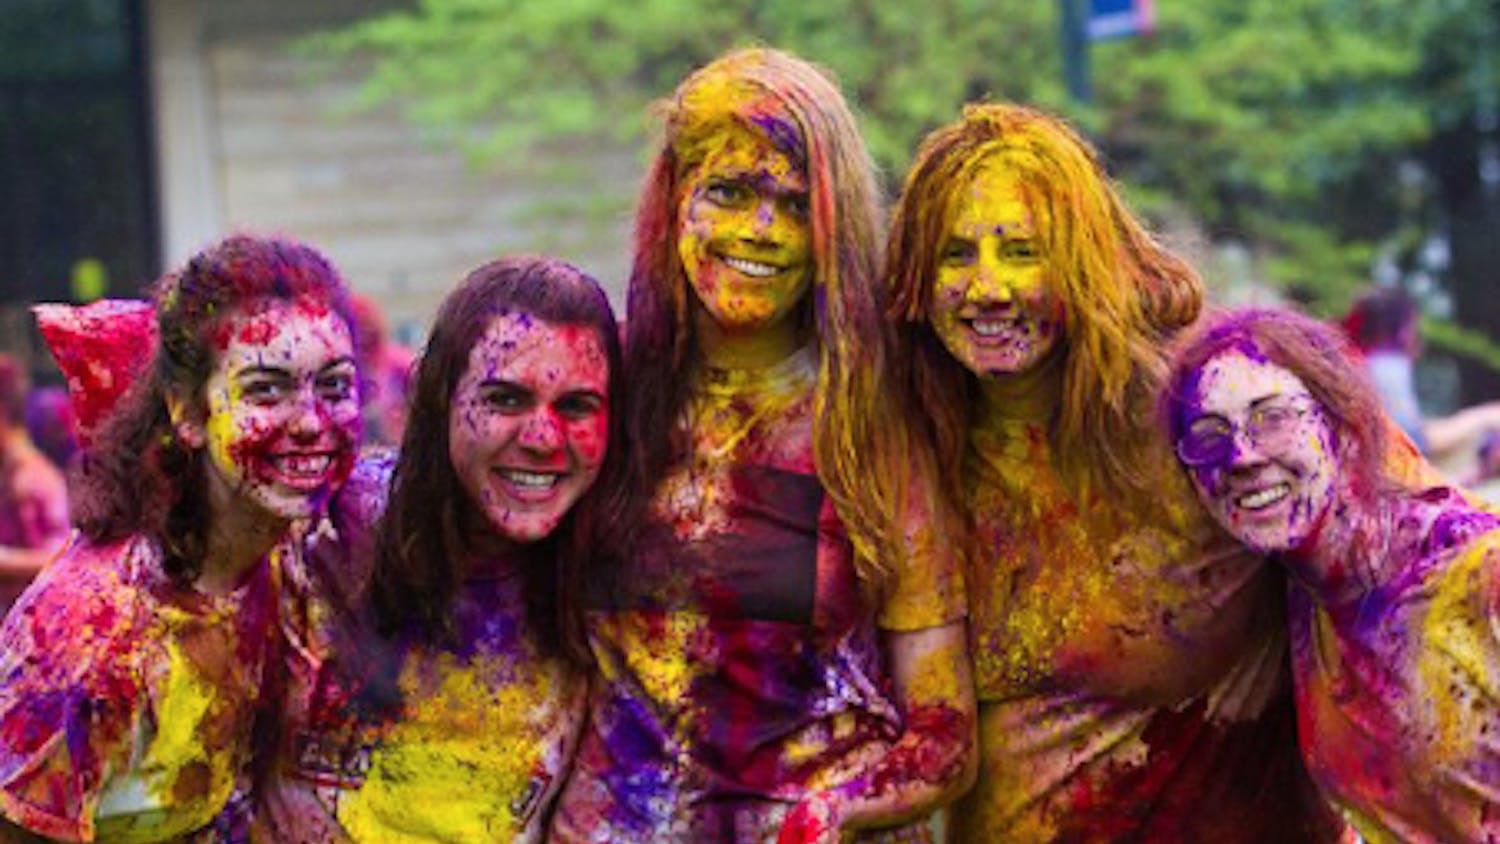 Students celebrated Holi on the Quad on March 25. From left Jean Cornell, Adriana Ganci, Hannah Harry, Jacqui Langer and Ali Wentzell.